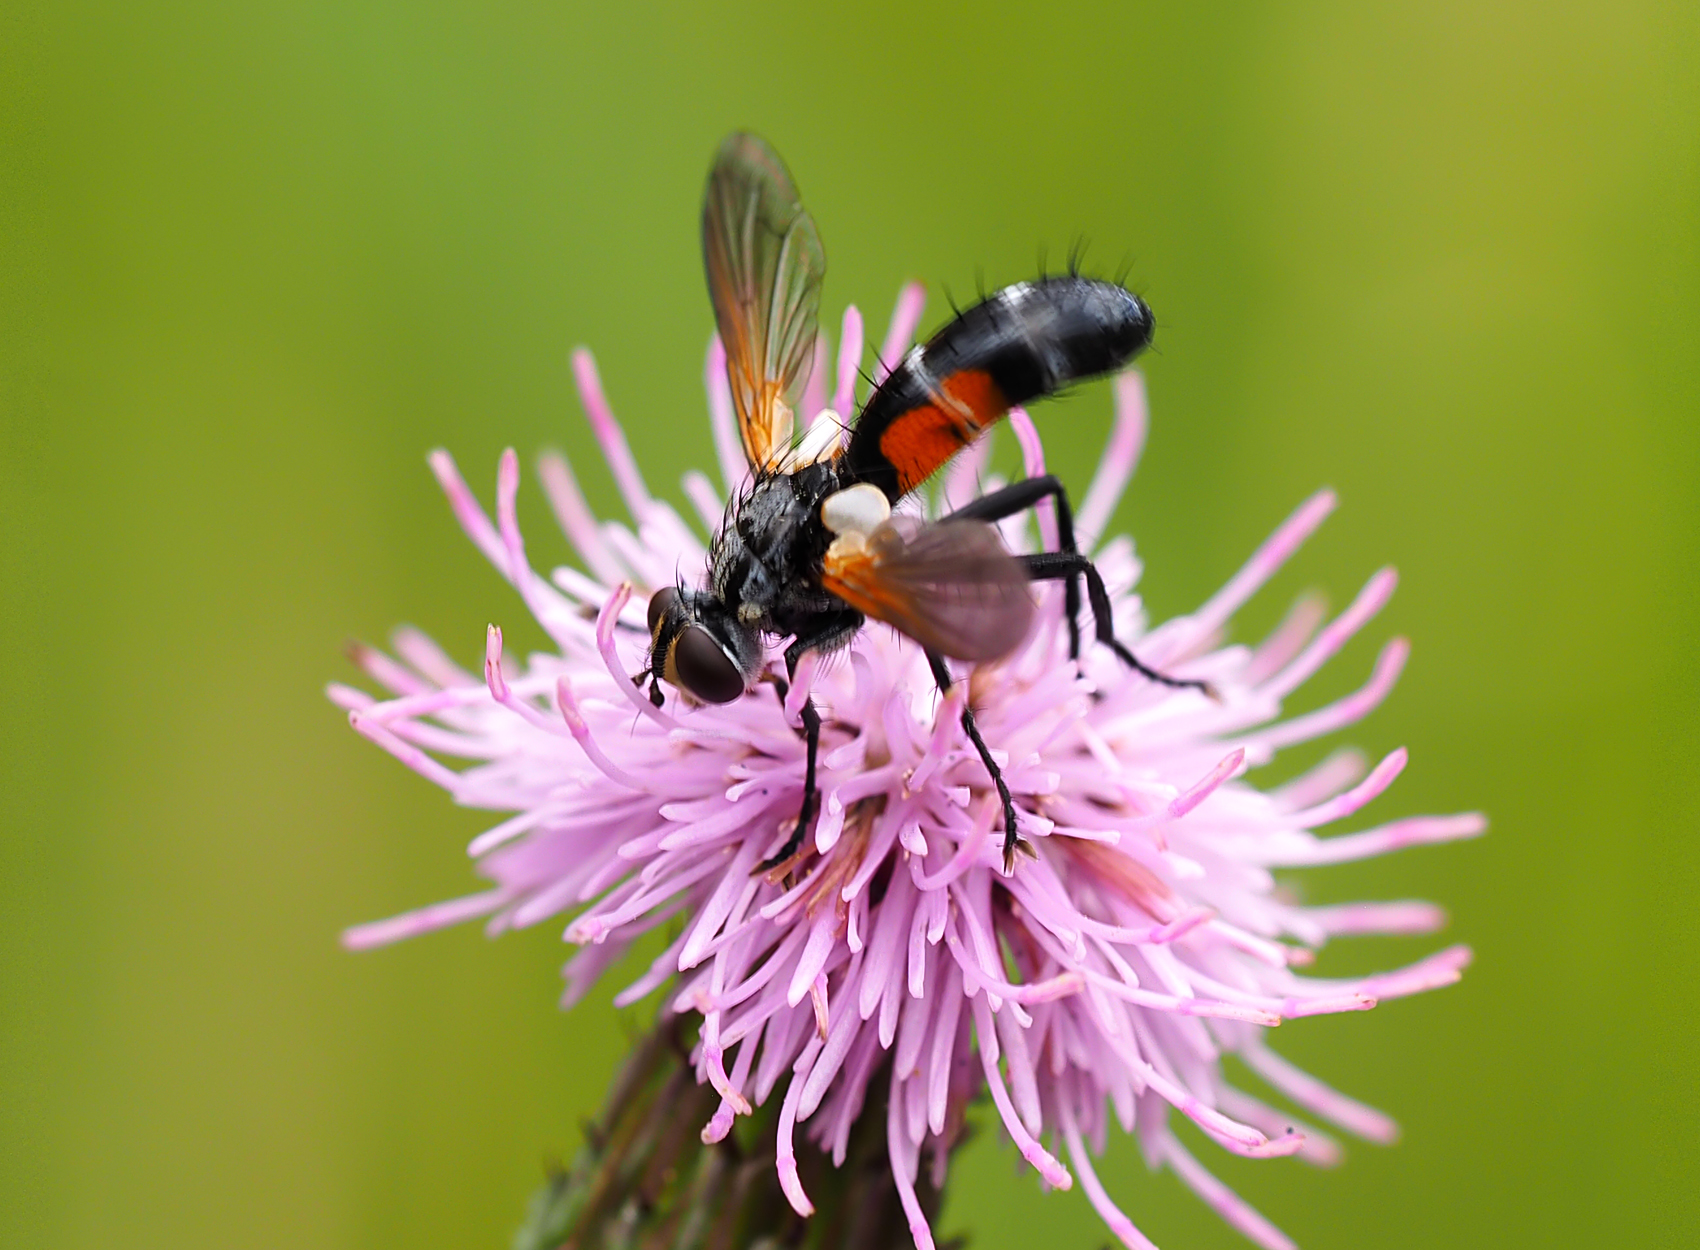 Raupenfliege02 (Cylindromyia bicolor)